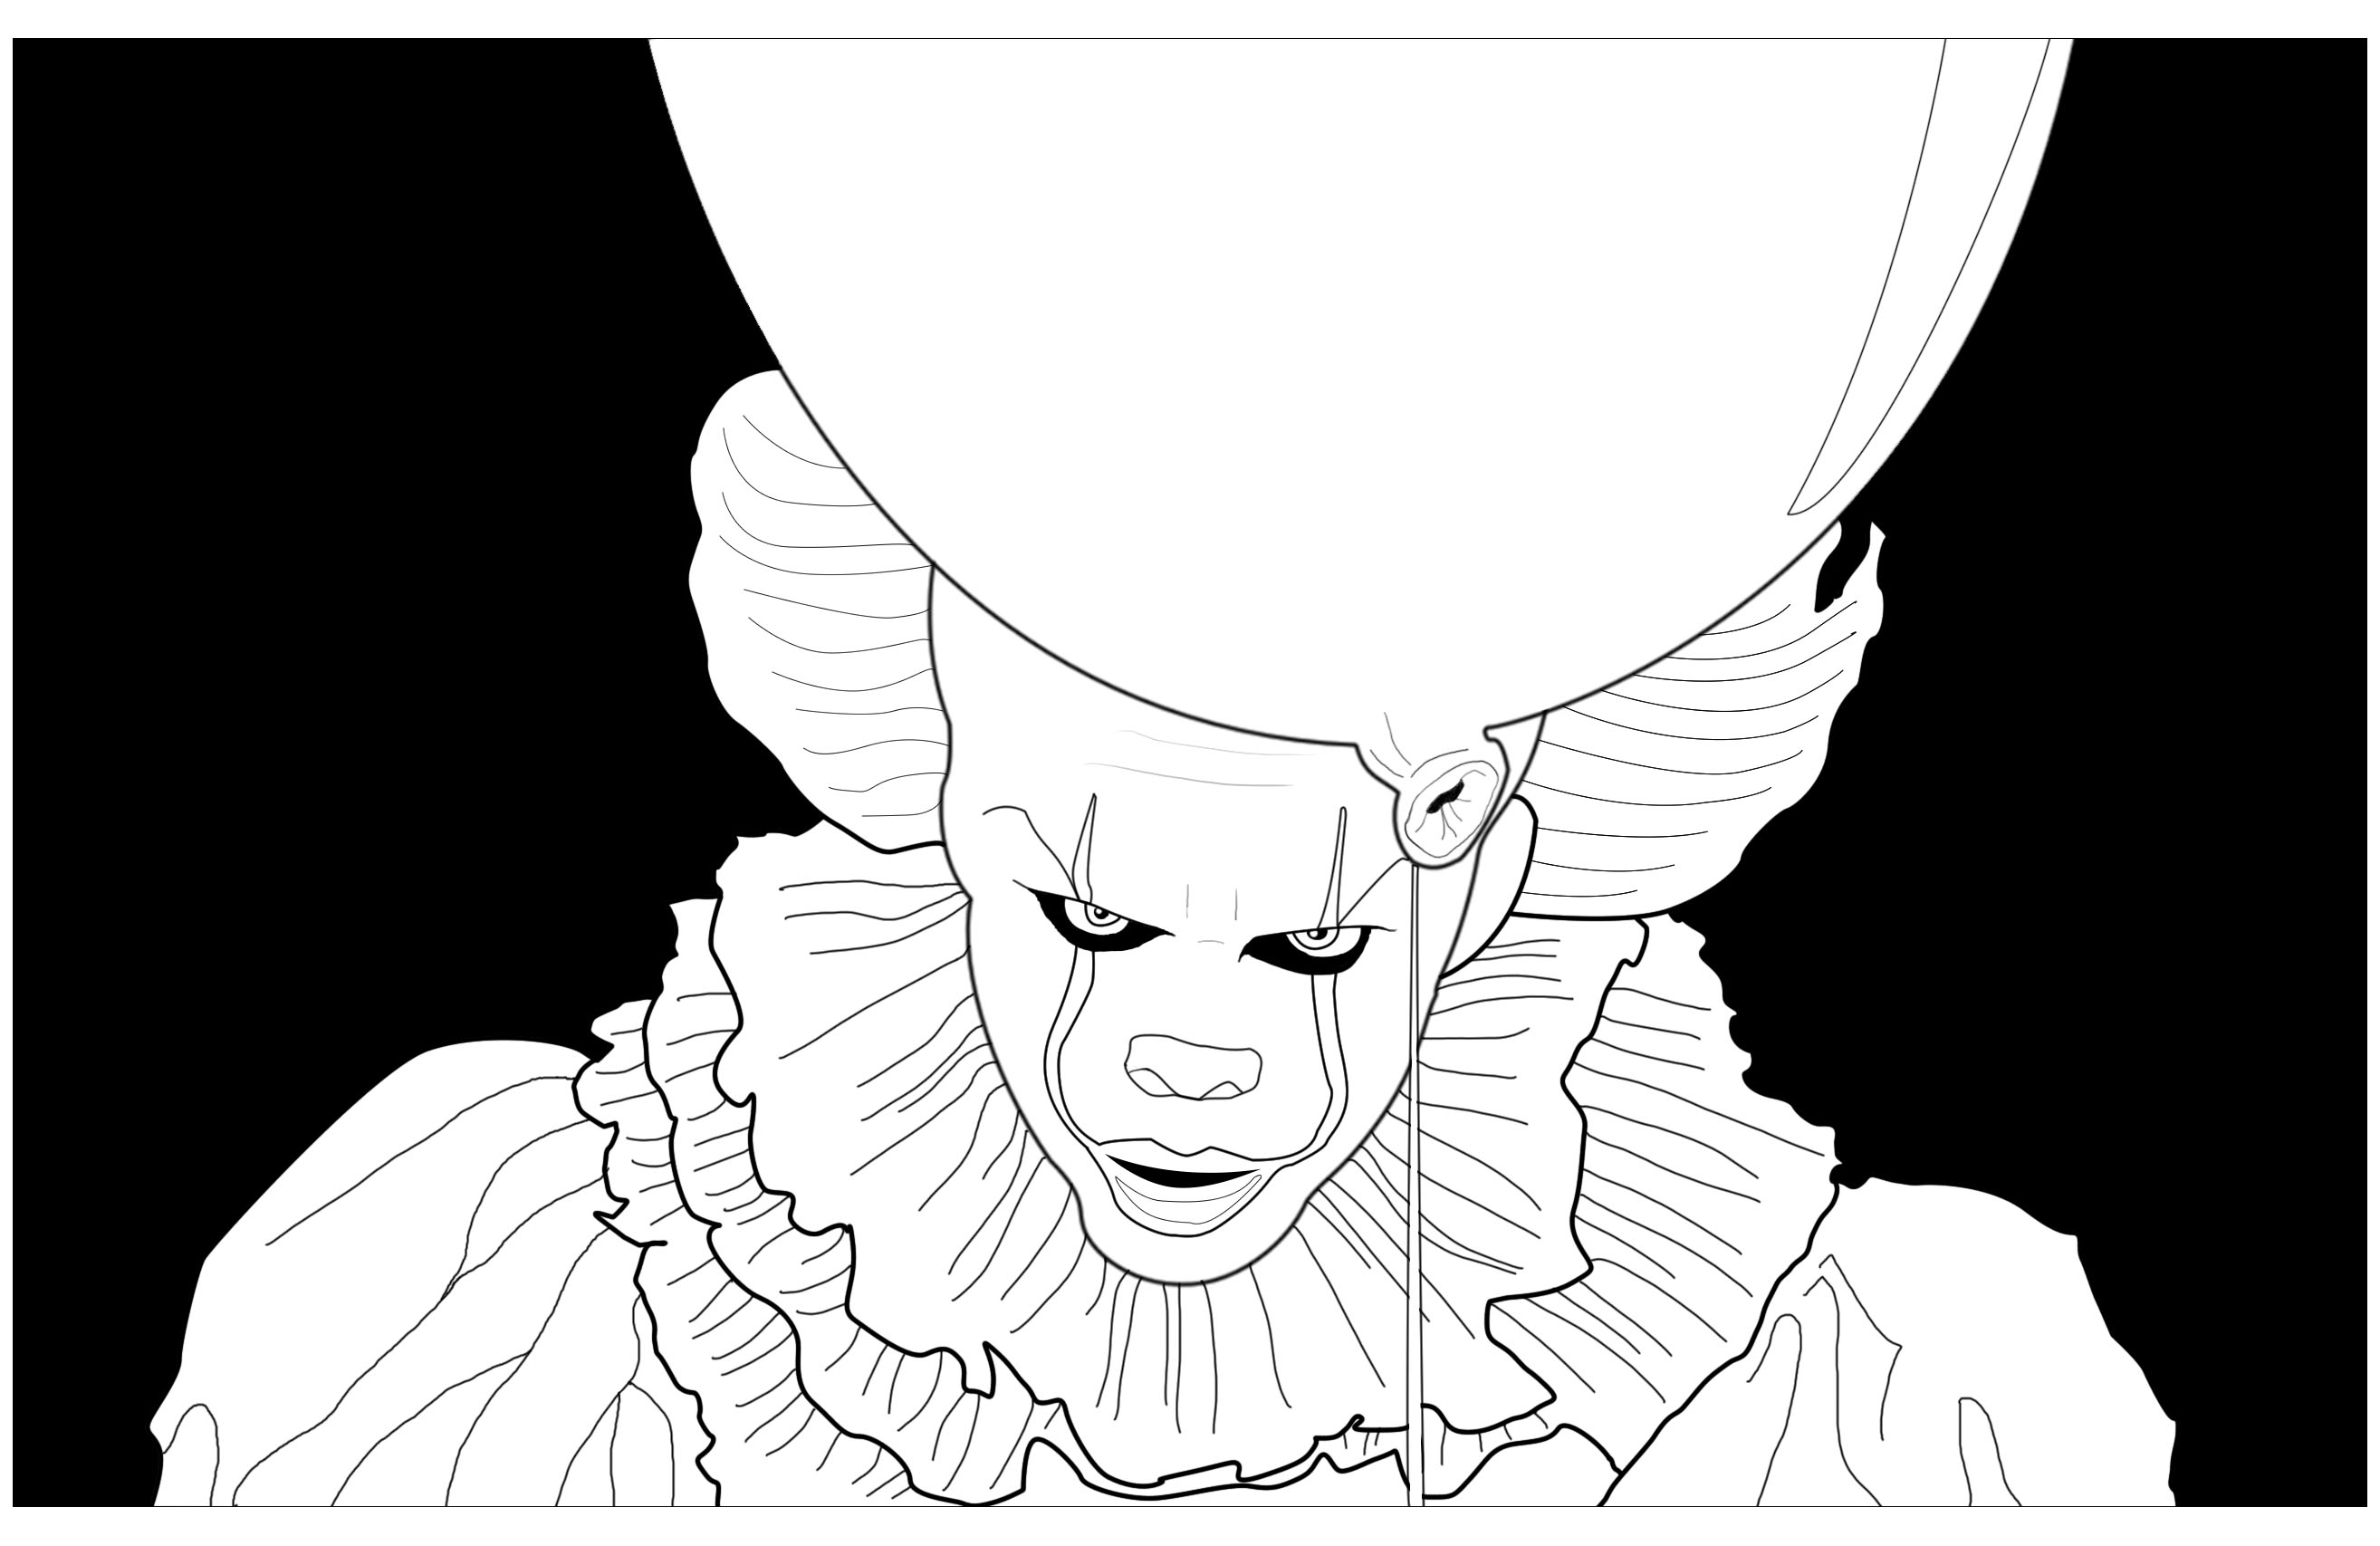 Pennywise, the maleficent clown from the 2017 movie It (from Stephen King novel) - Black background, Artist : Olivier